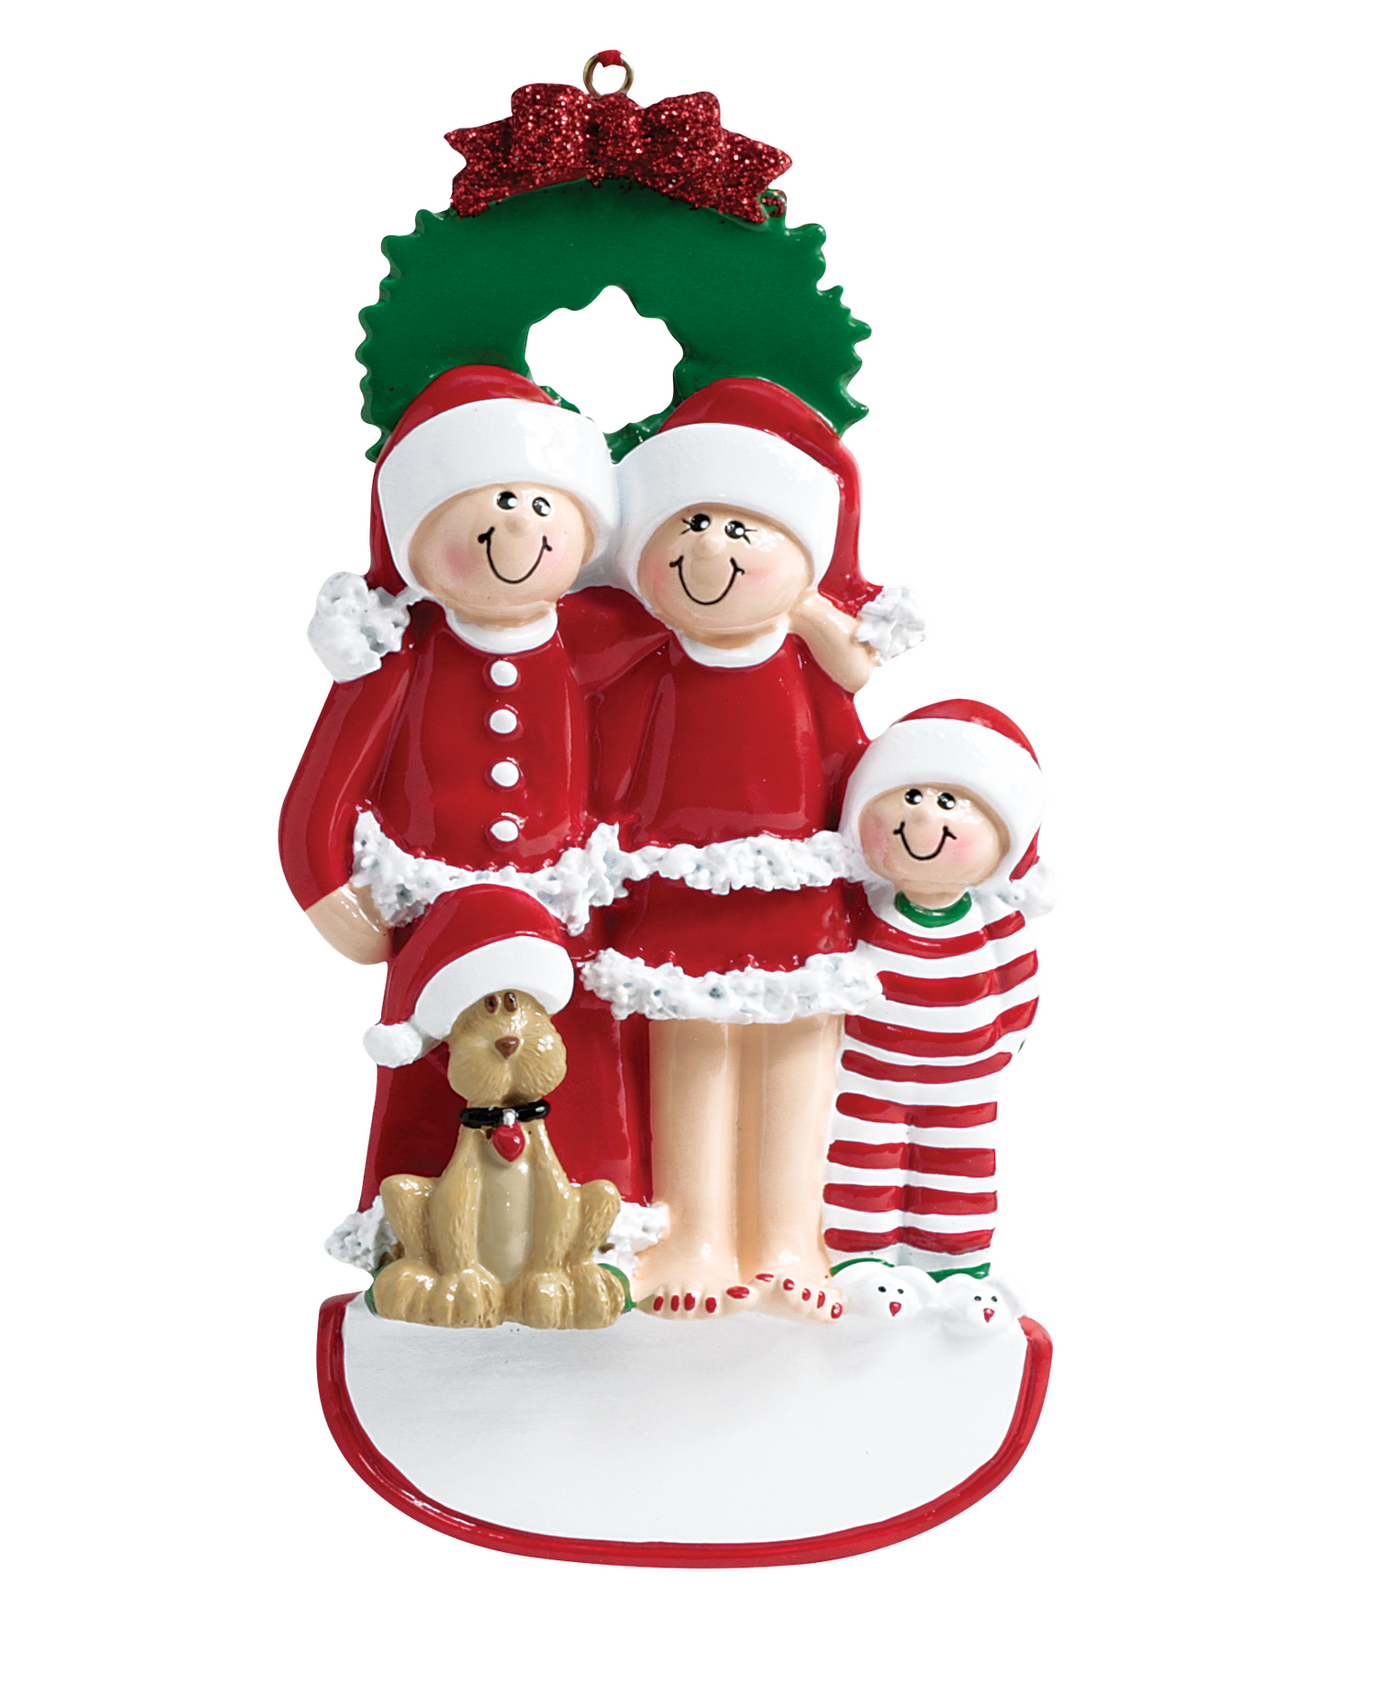 Cute Family Christmas Ornament of Three With a Dog - Santa'Ville.png